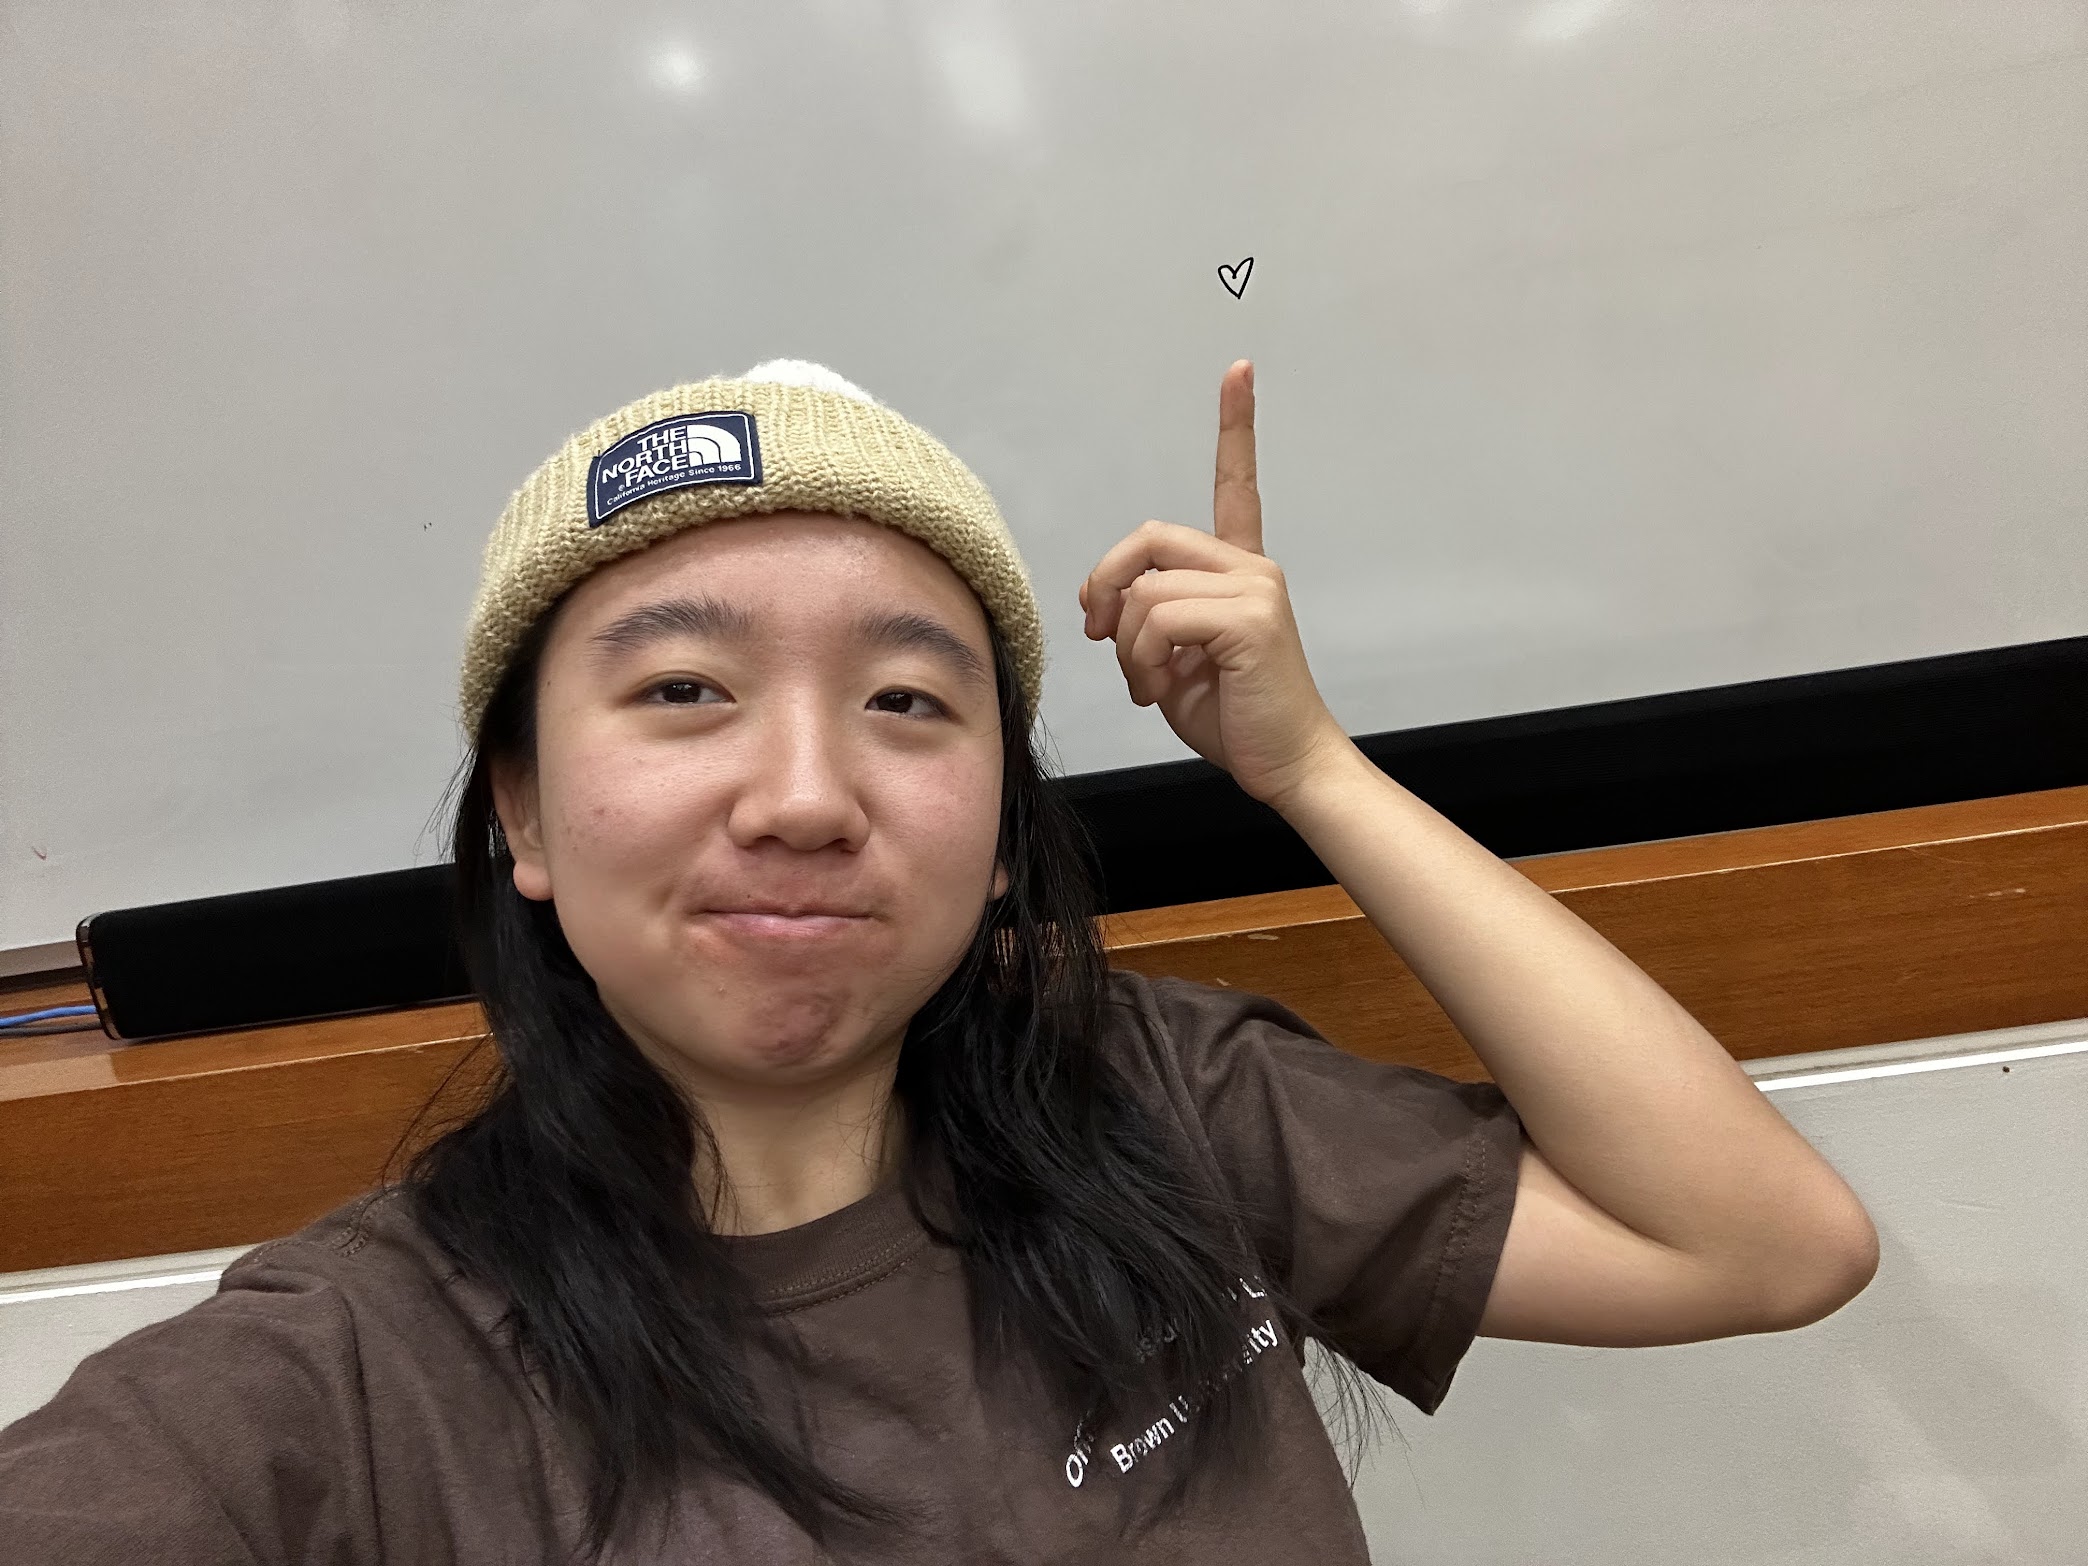 Selfie of Chilsea in a rice-colored beanie with a Brown University shirt. She is pointing to a whiteboard, where there is a heart drawn